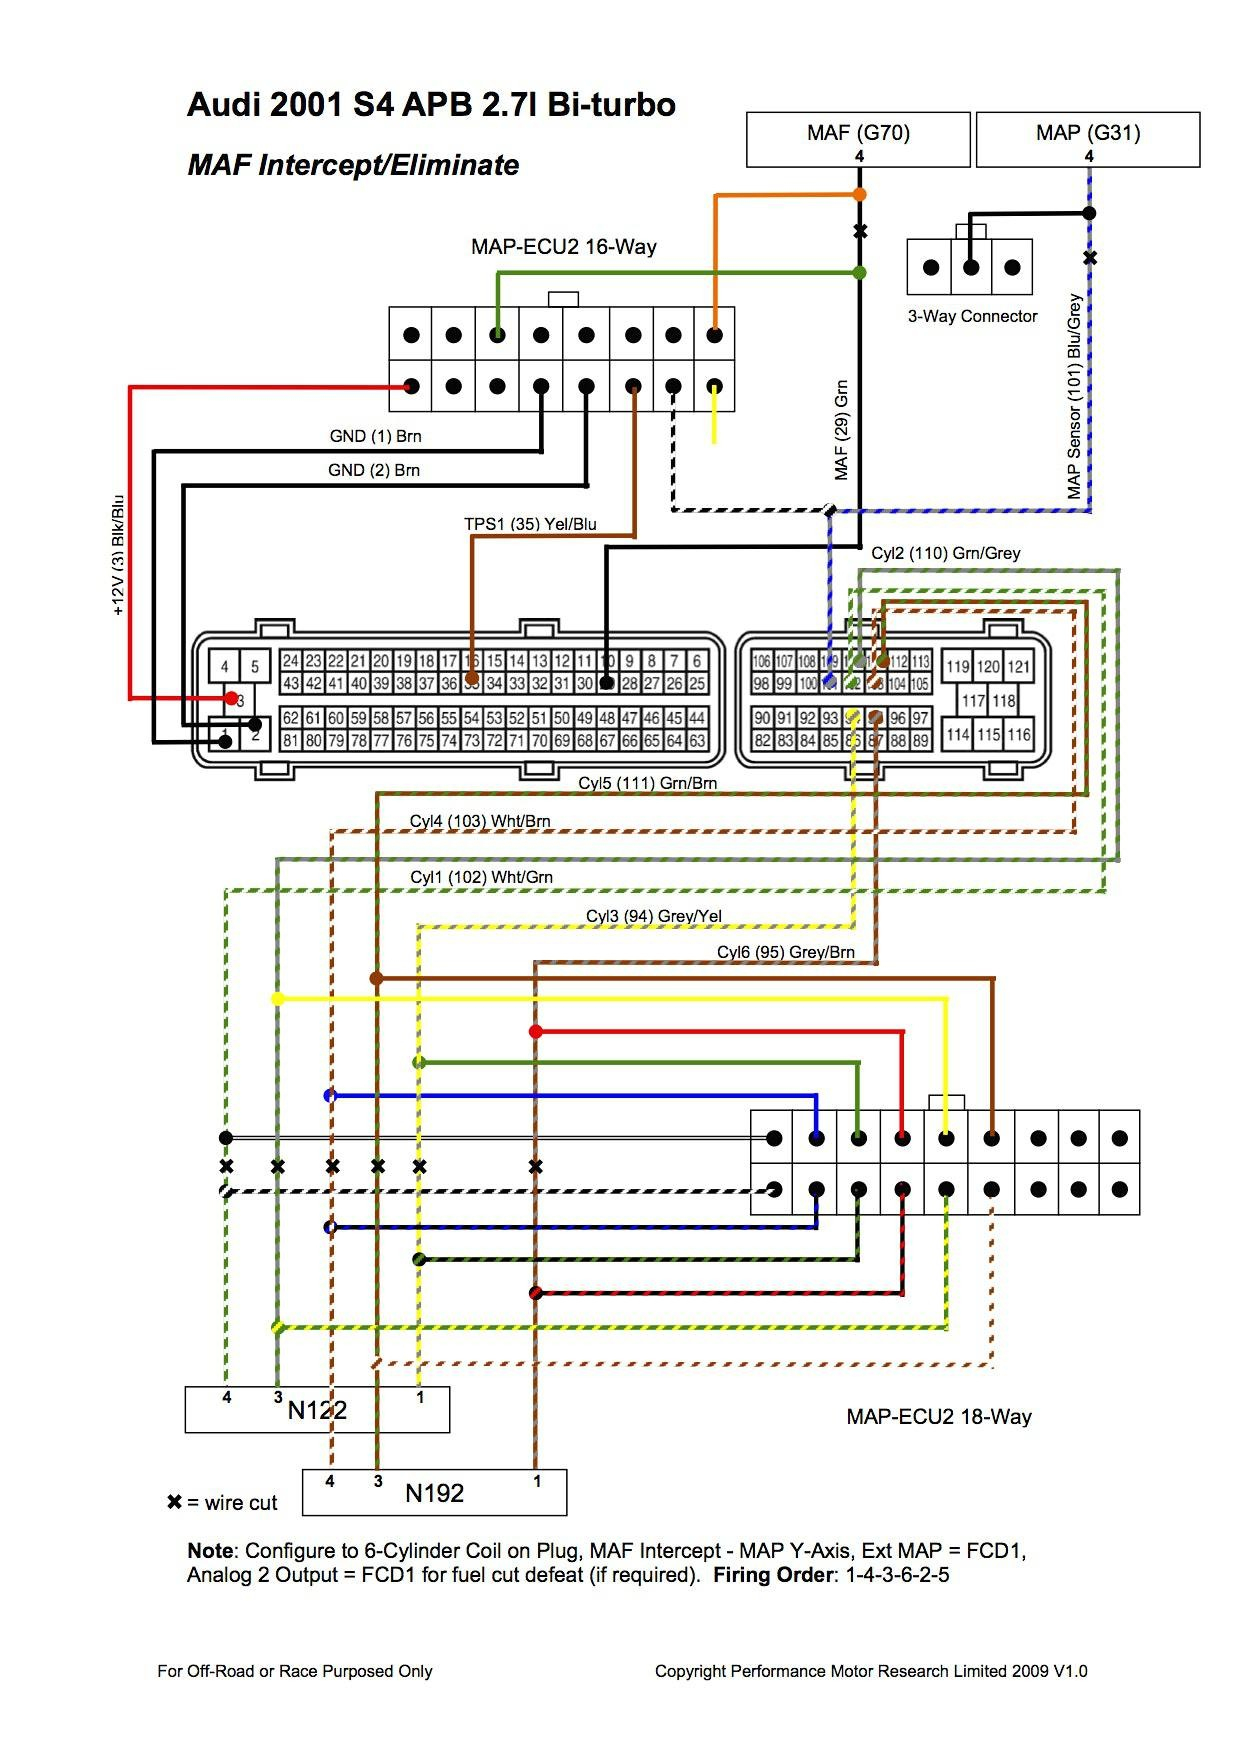 Dodge Wiring Harness Diagram - Wiring Diagrams Hubs - Radio Wiring Harness Diagram